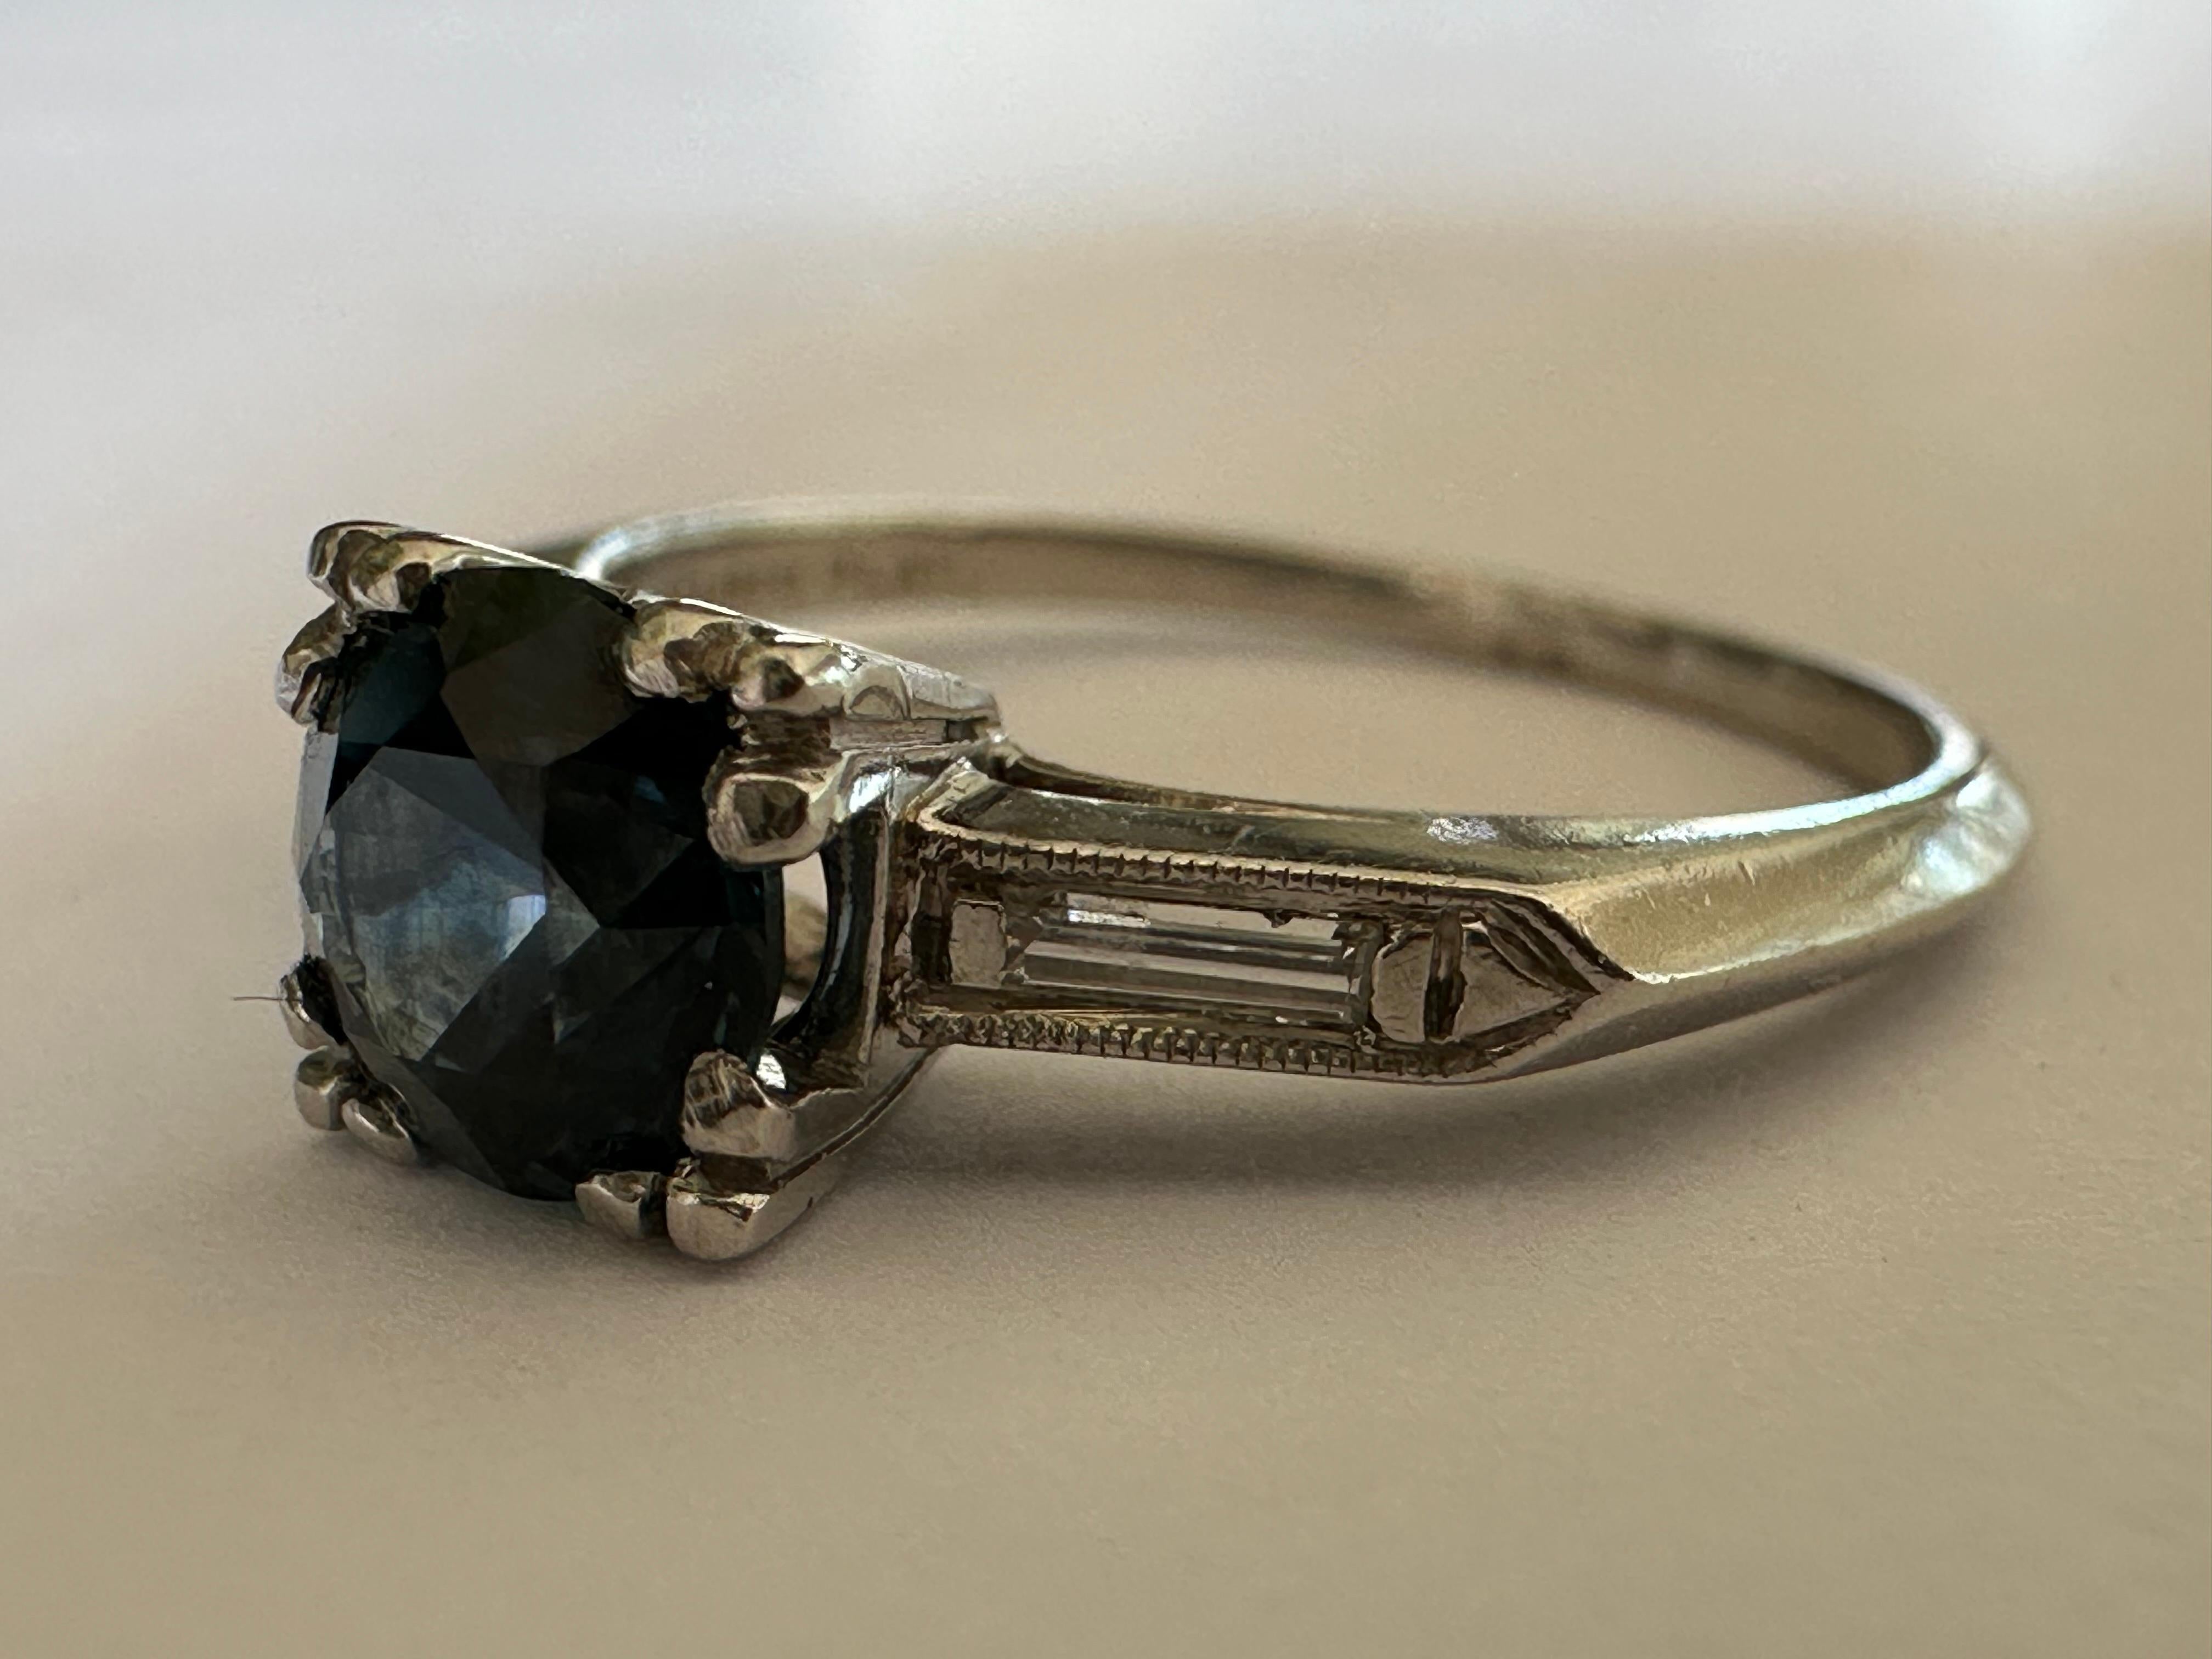 A rare 1.08-carat natural deep blue Montana sapphire measuring 6.05 mm centers this mid-century ring crafted in the 1950s flanked by two baguette diamonds totaling approximately 0.10 carat and bordered by fine millegrain edging. Set in platinum. 

